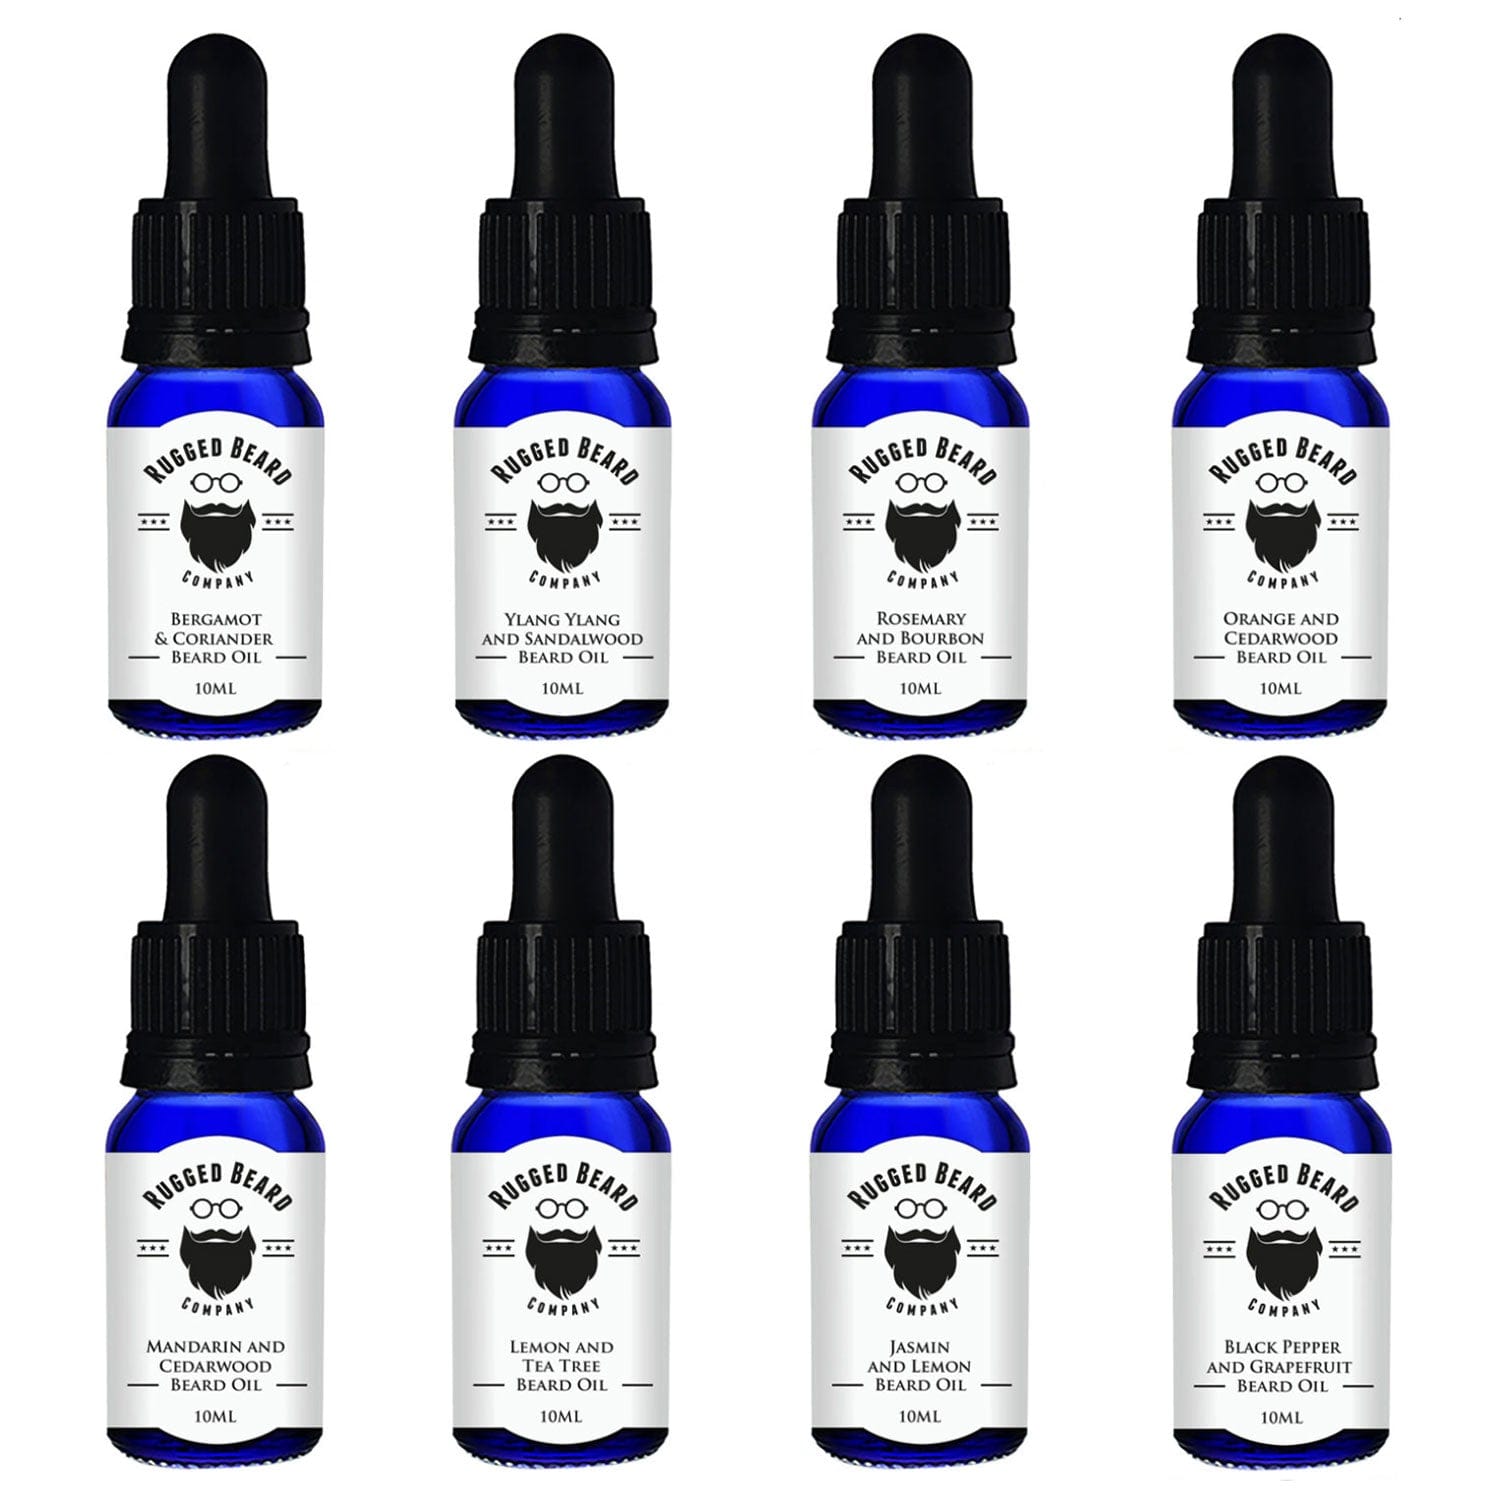 10ml Beard Oil - 100% Natural - Soften, Tame, Stop Itching - The Rugged Beard Company